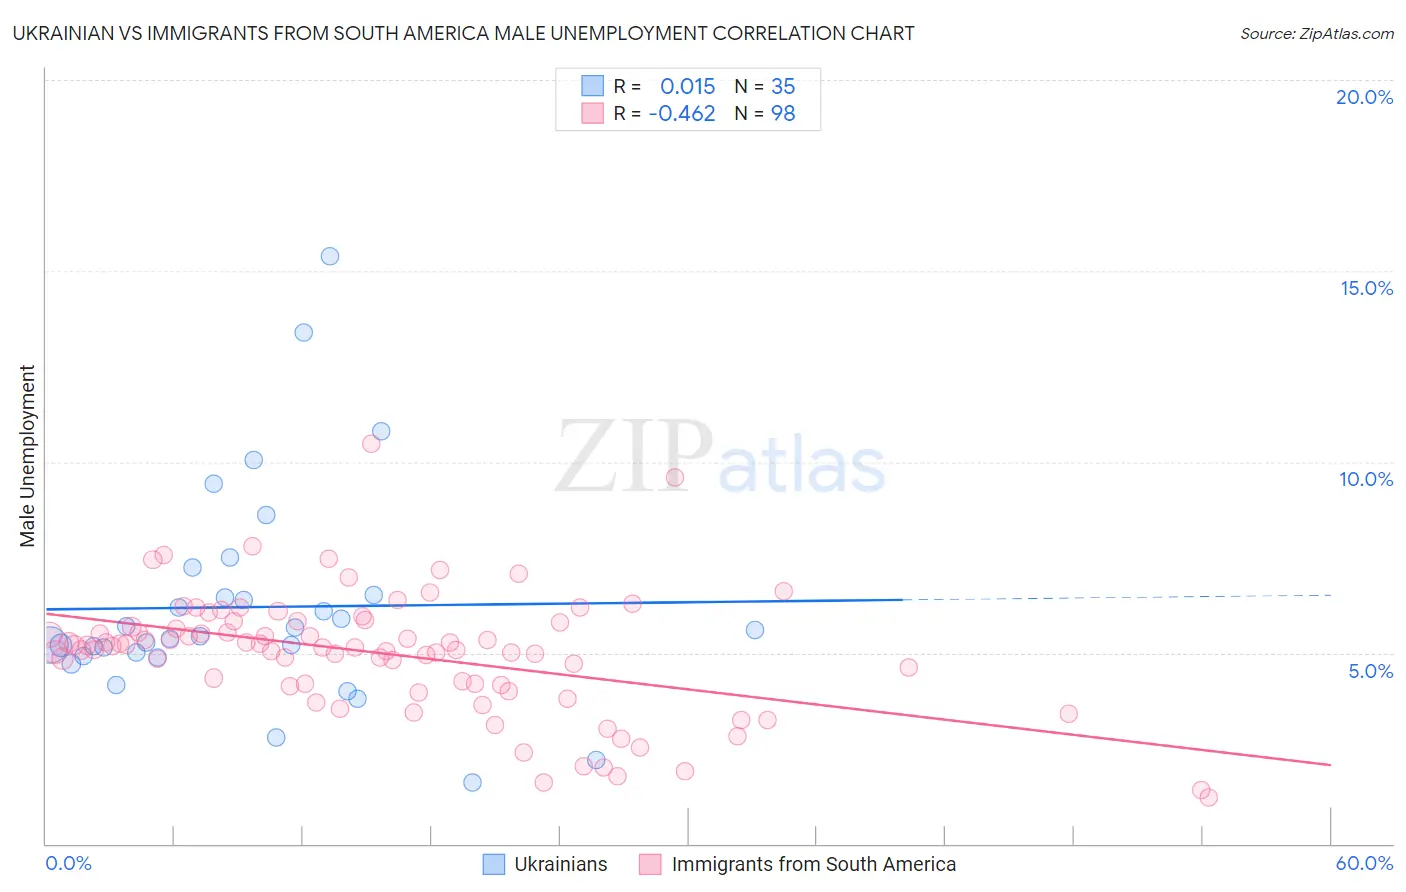 Ukrainian vs Immigrants from South America Male Unemployment